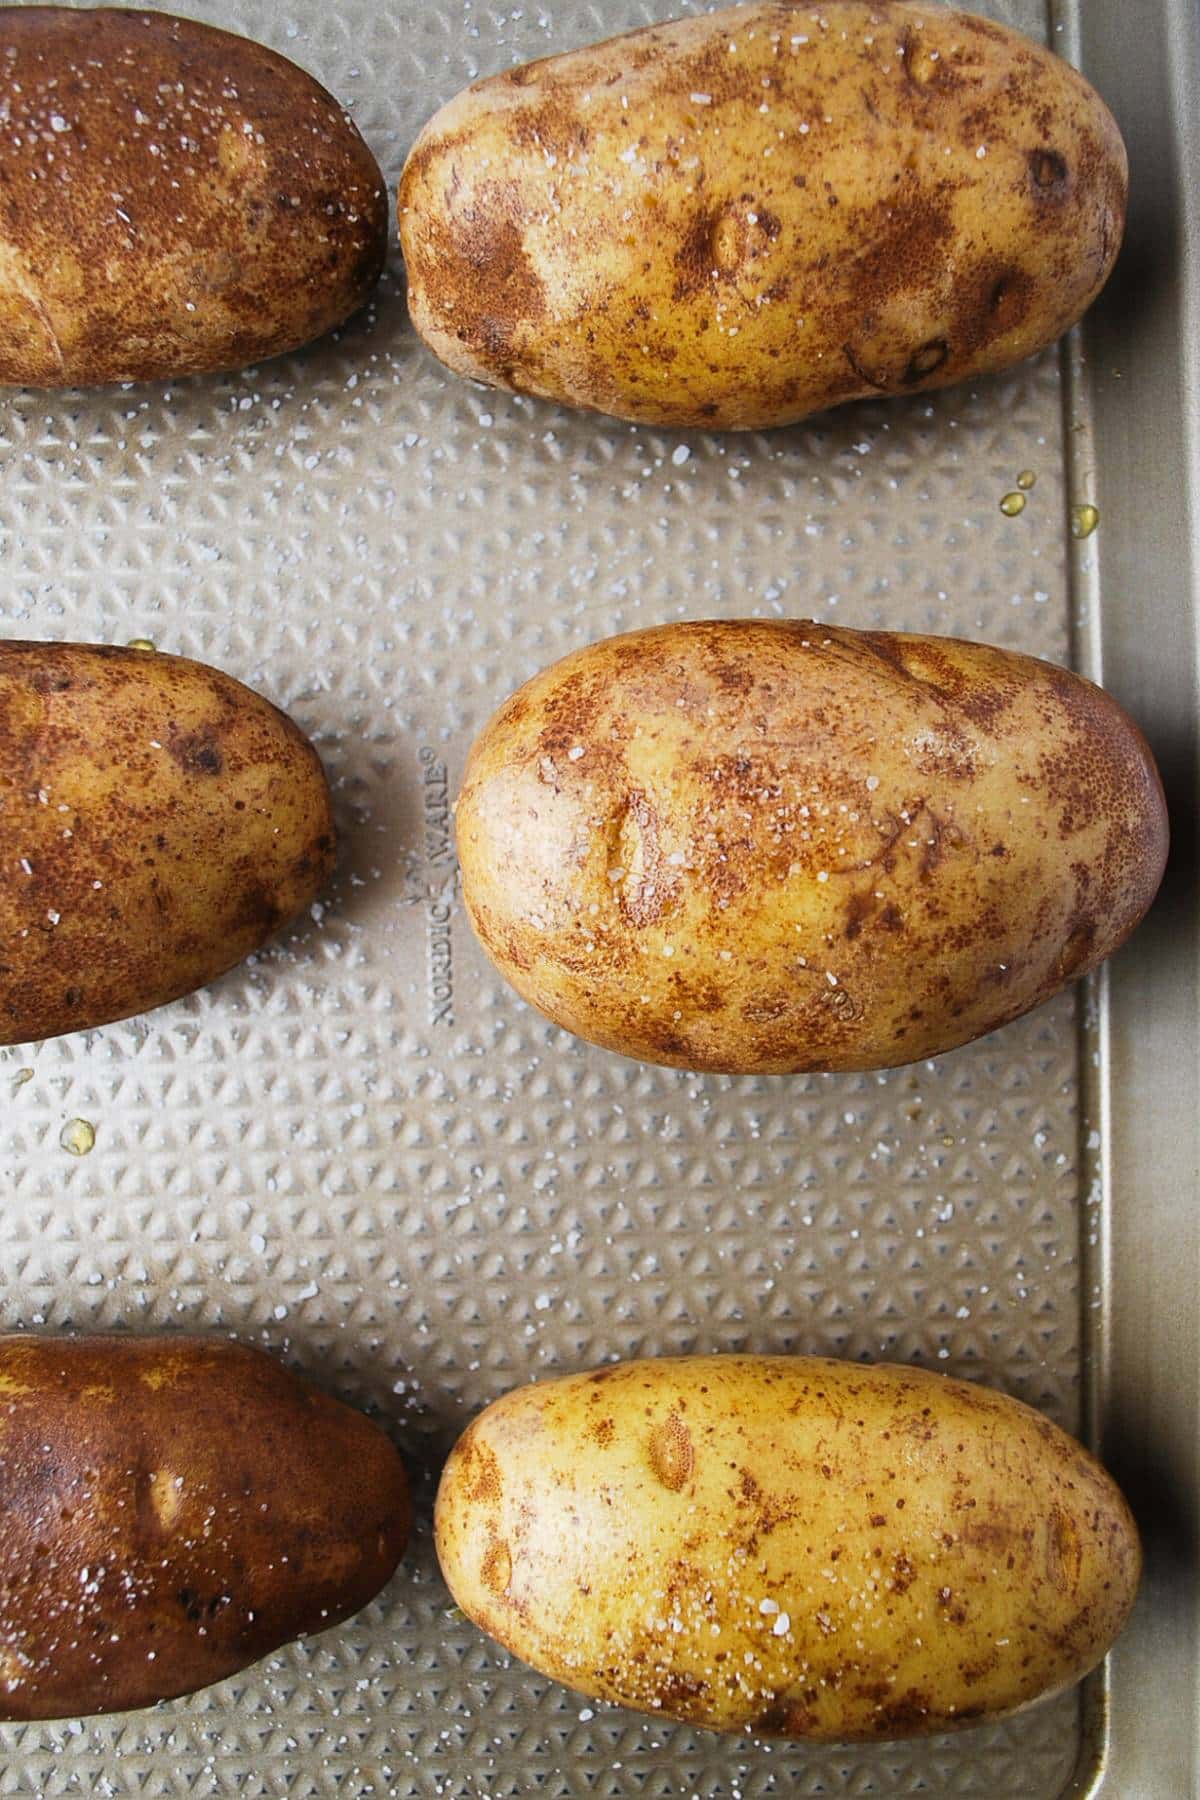 baked potatoes sprinkled with coarse salt on a baking sheet